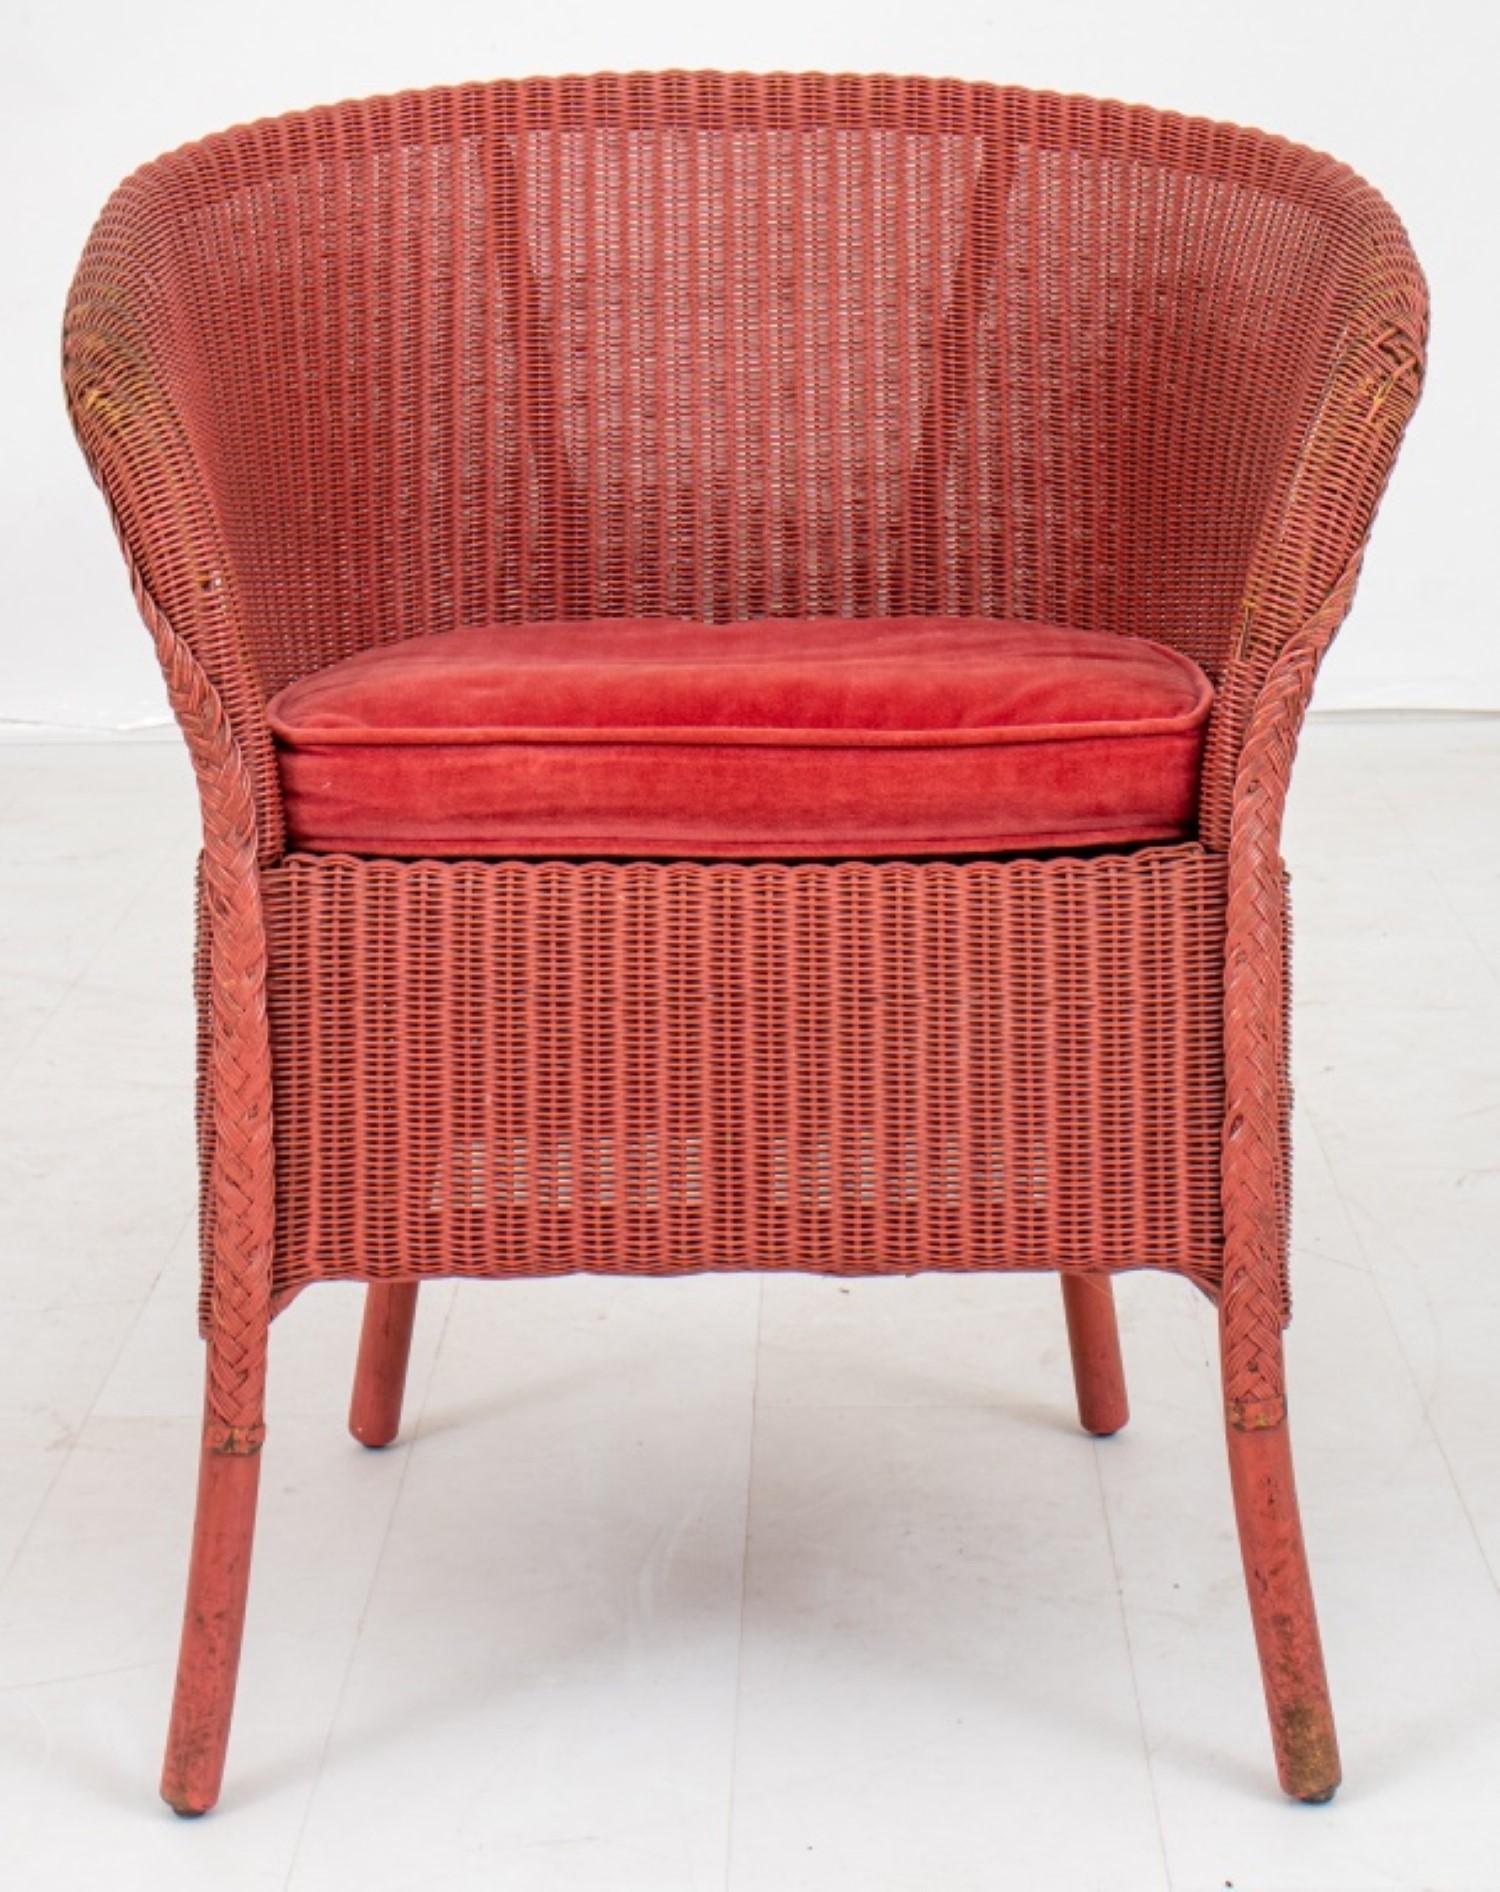 Vintage Lloyd Loom 'Beverly' woven wicker tub  chair in red, with rounded back and sides,  on four legs, with label to underside.Dimensions28.4 H x 24 L x 16D inches 